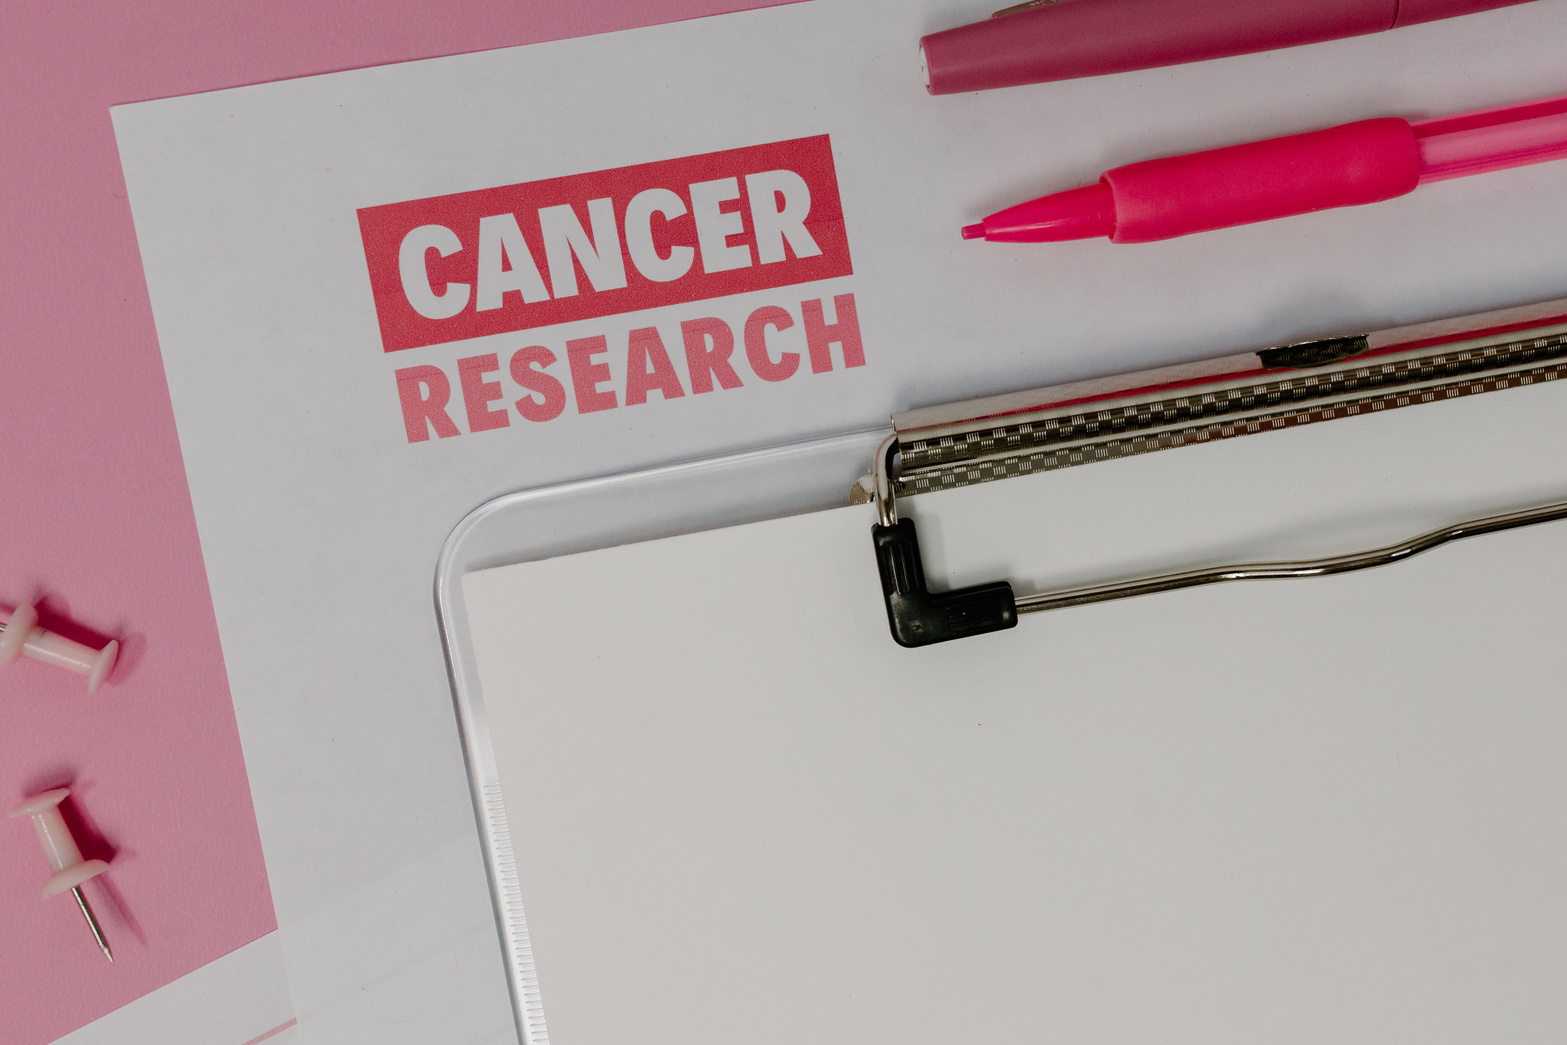 A Clipboard on Cancer Research Paper